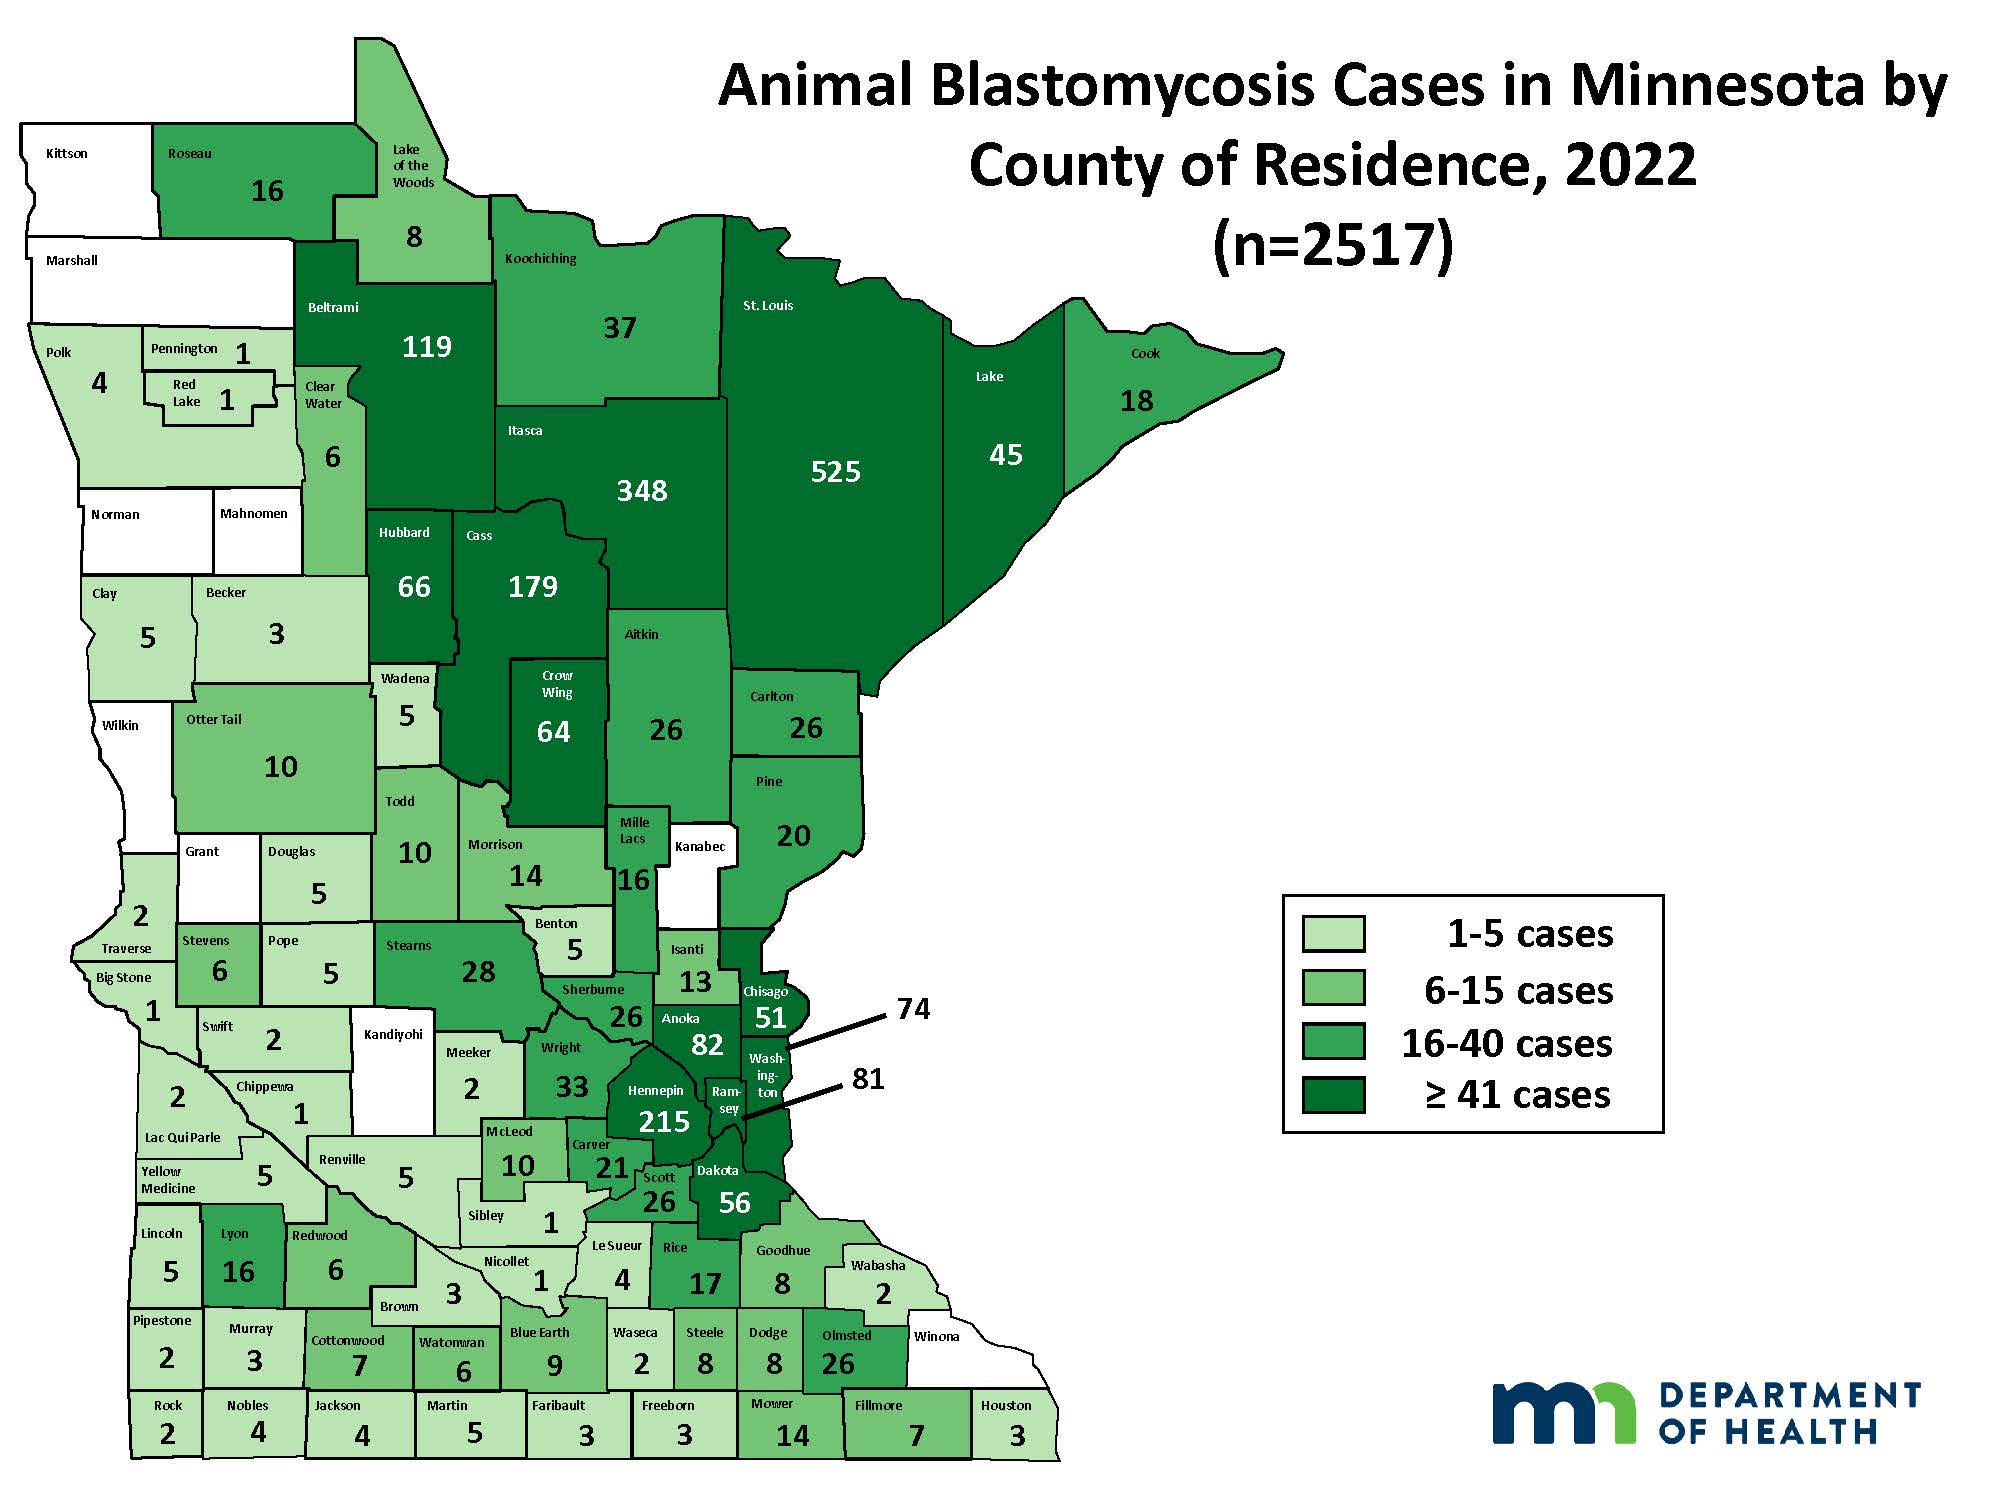 Map of Minnesota showing incidence of animal blastomycosis by county of residence